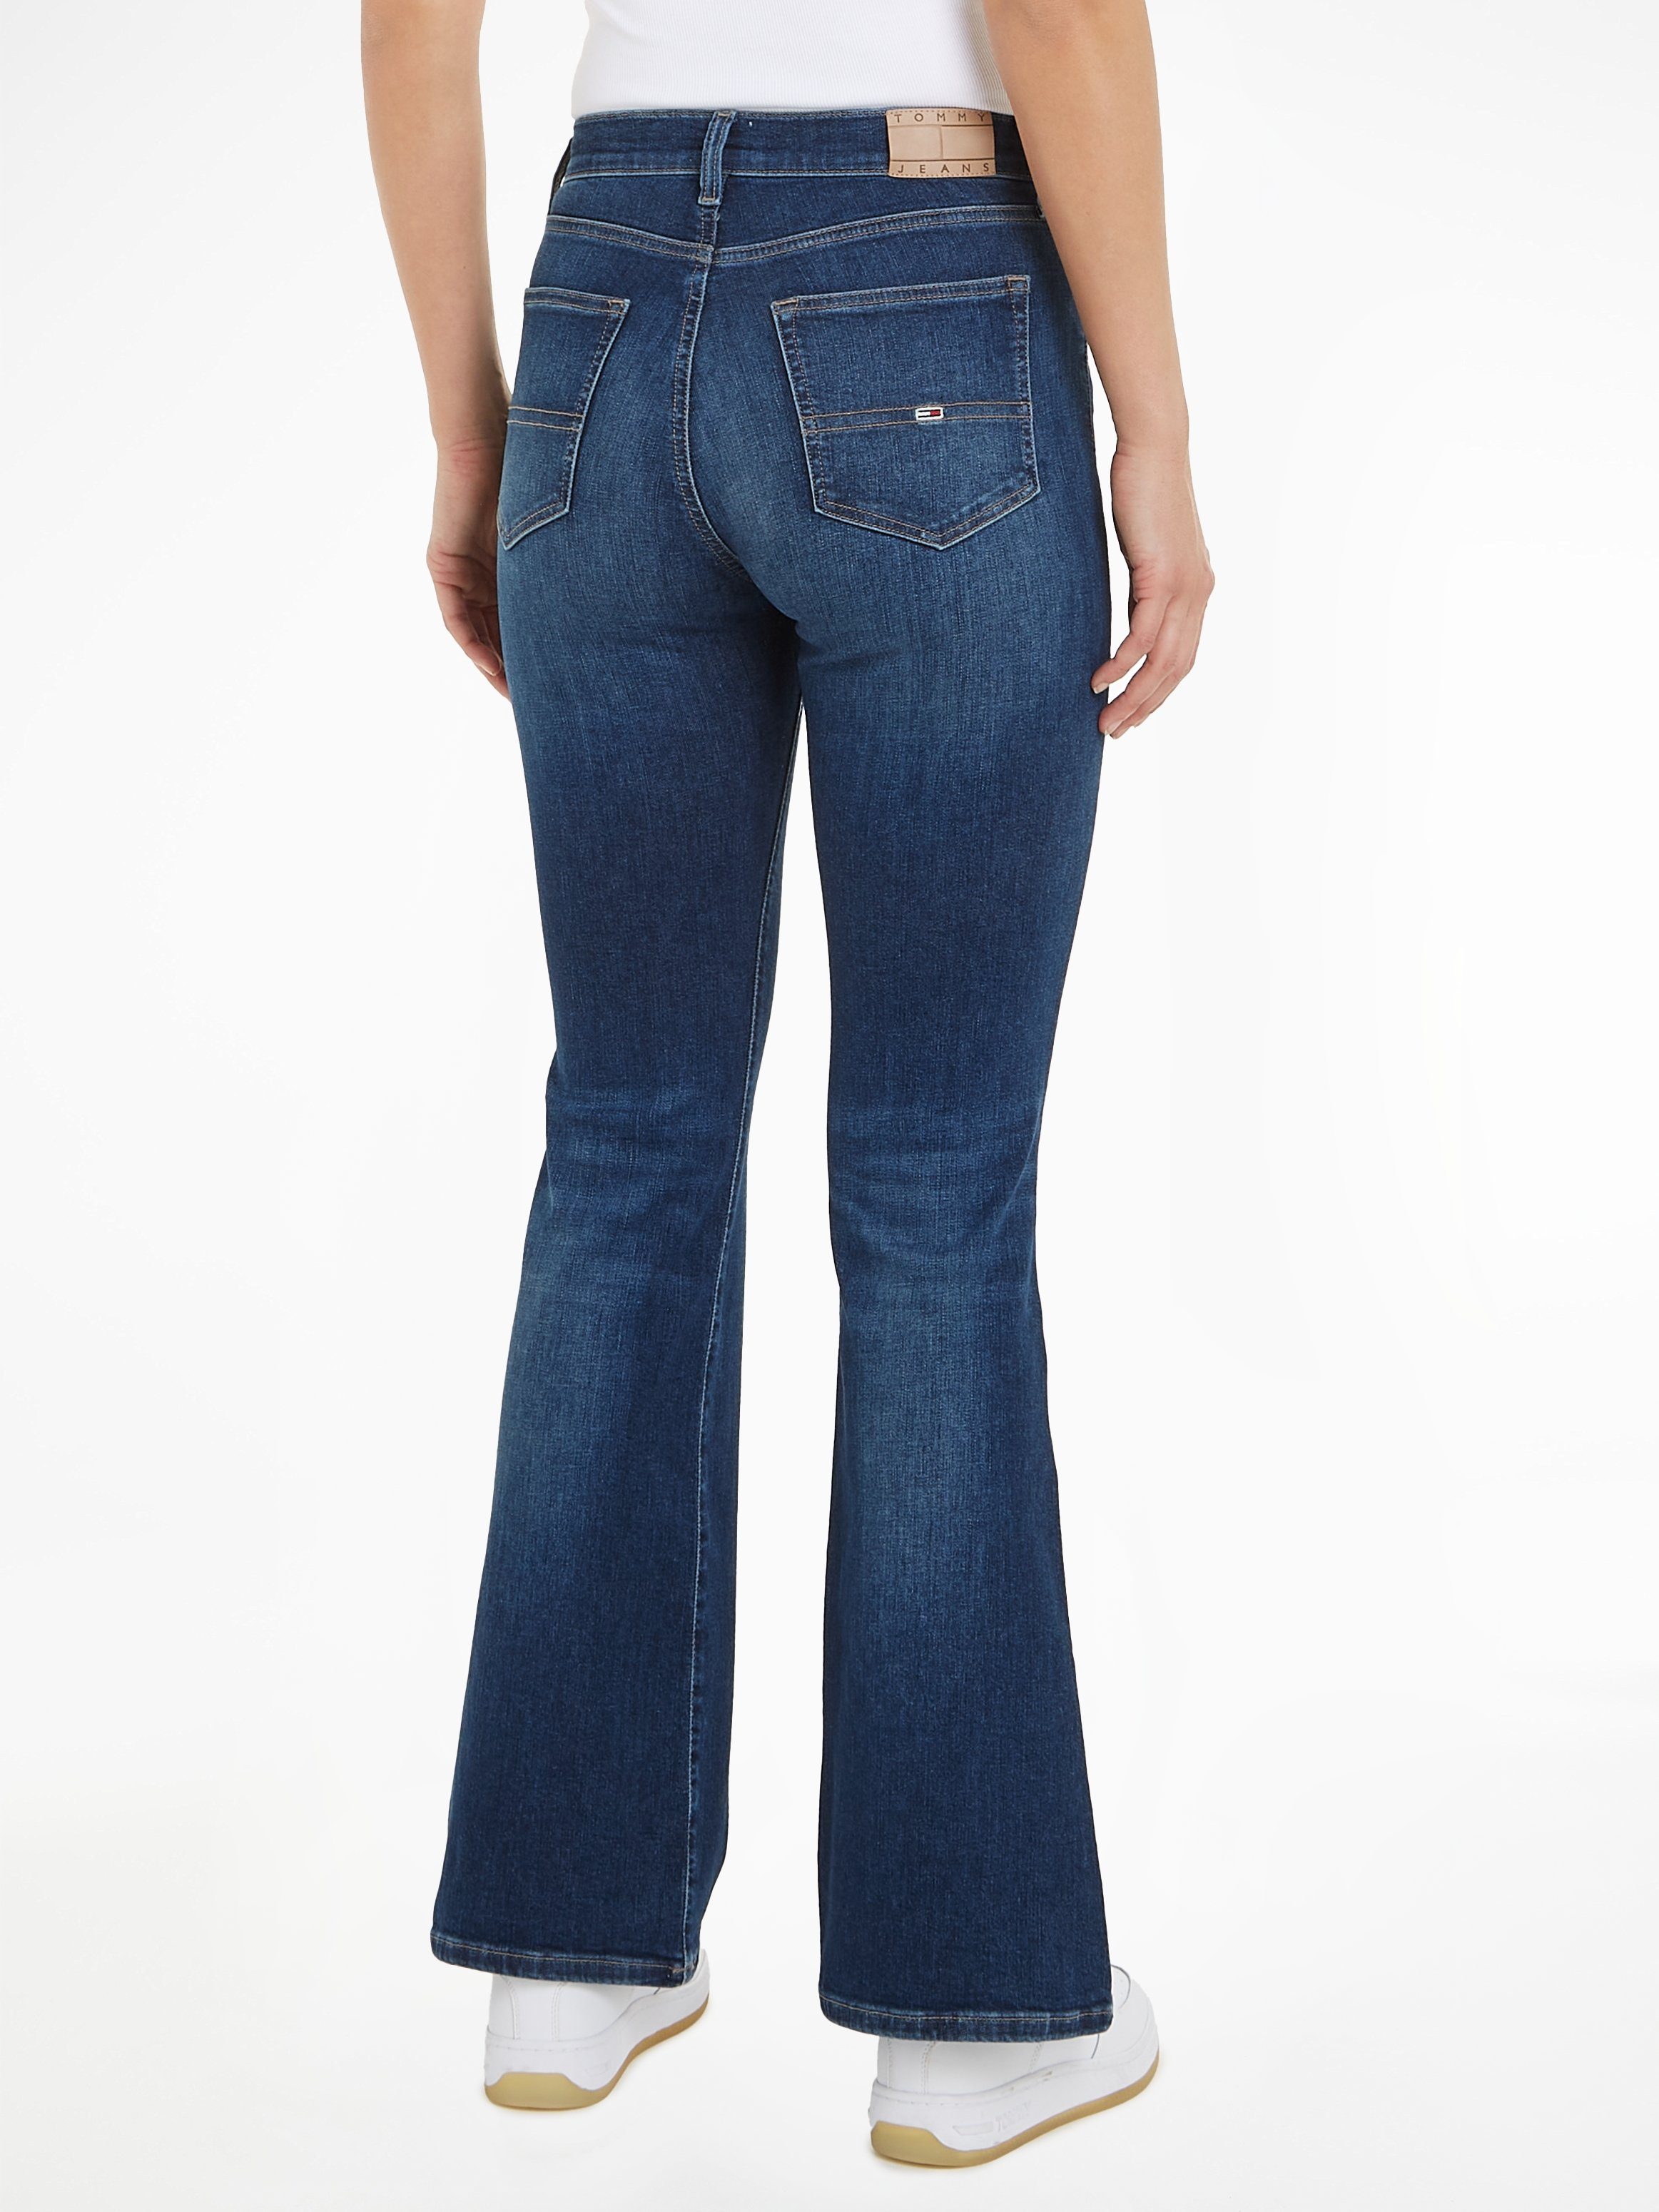 Jeans mit blue30 Jeans mid Sylvia Bequeme Tommy Markenlabel